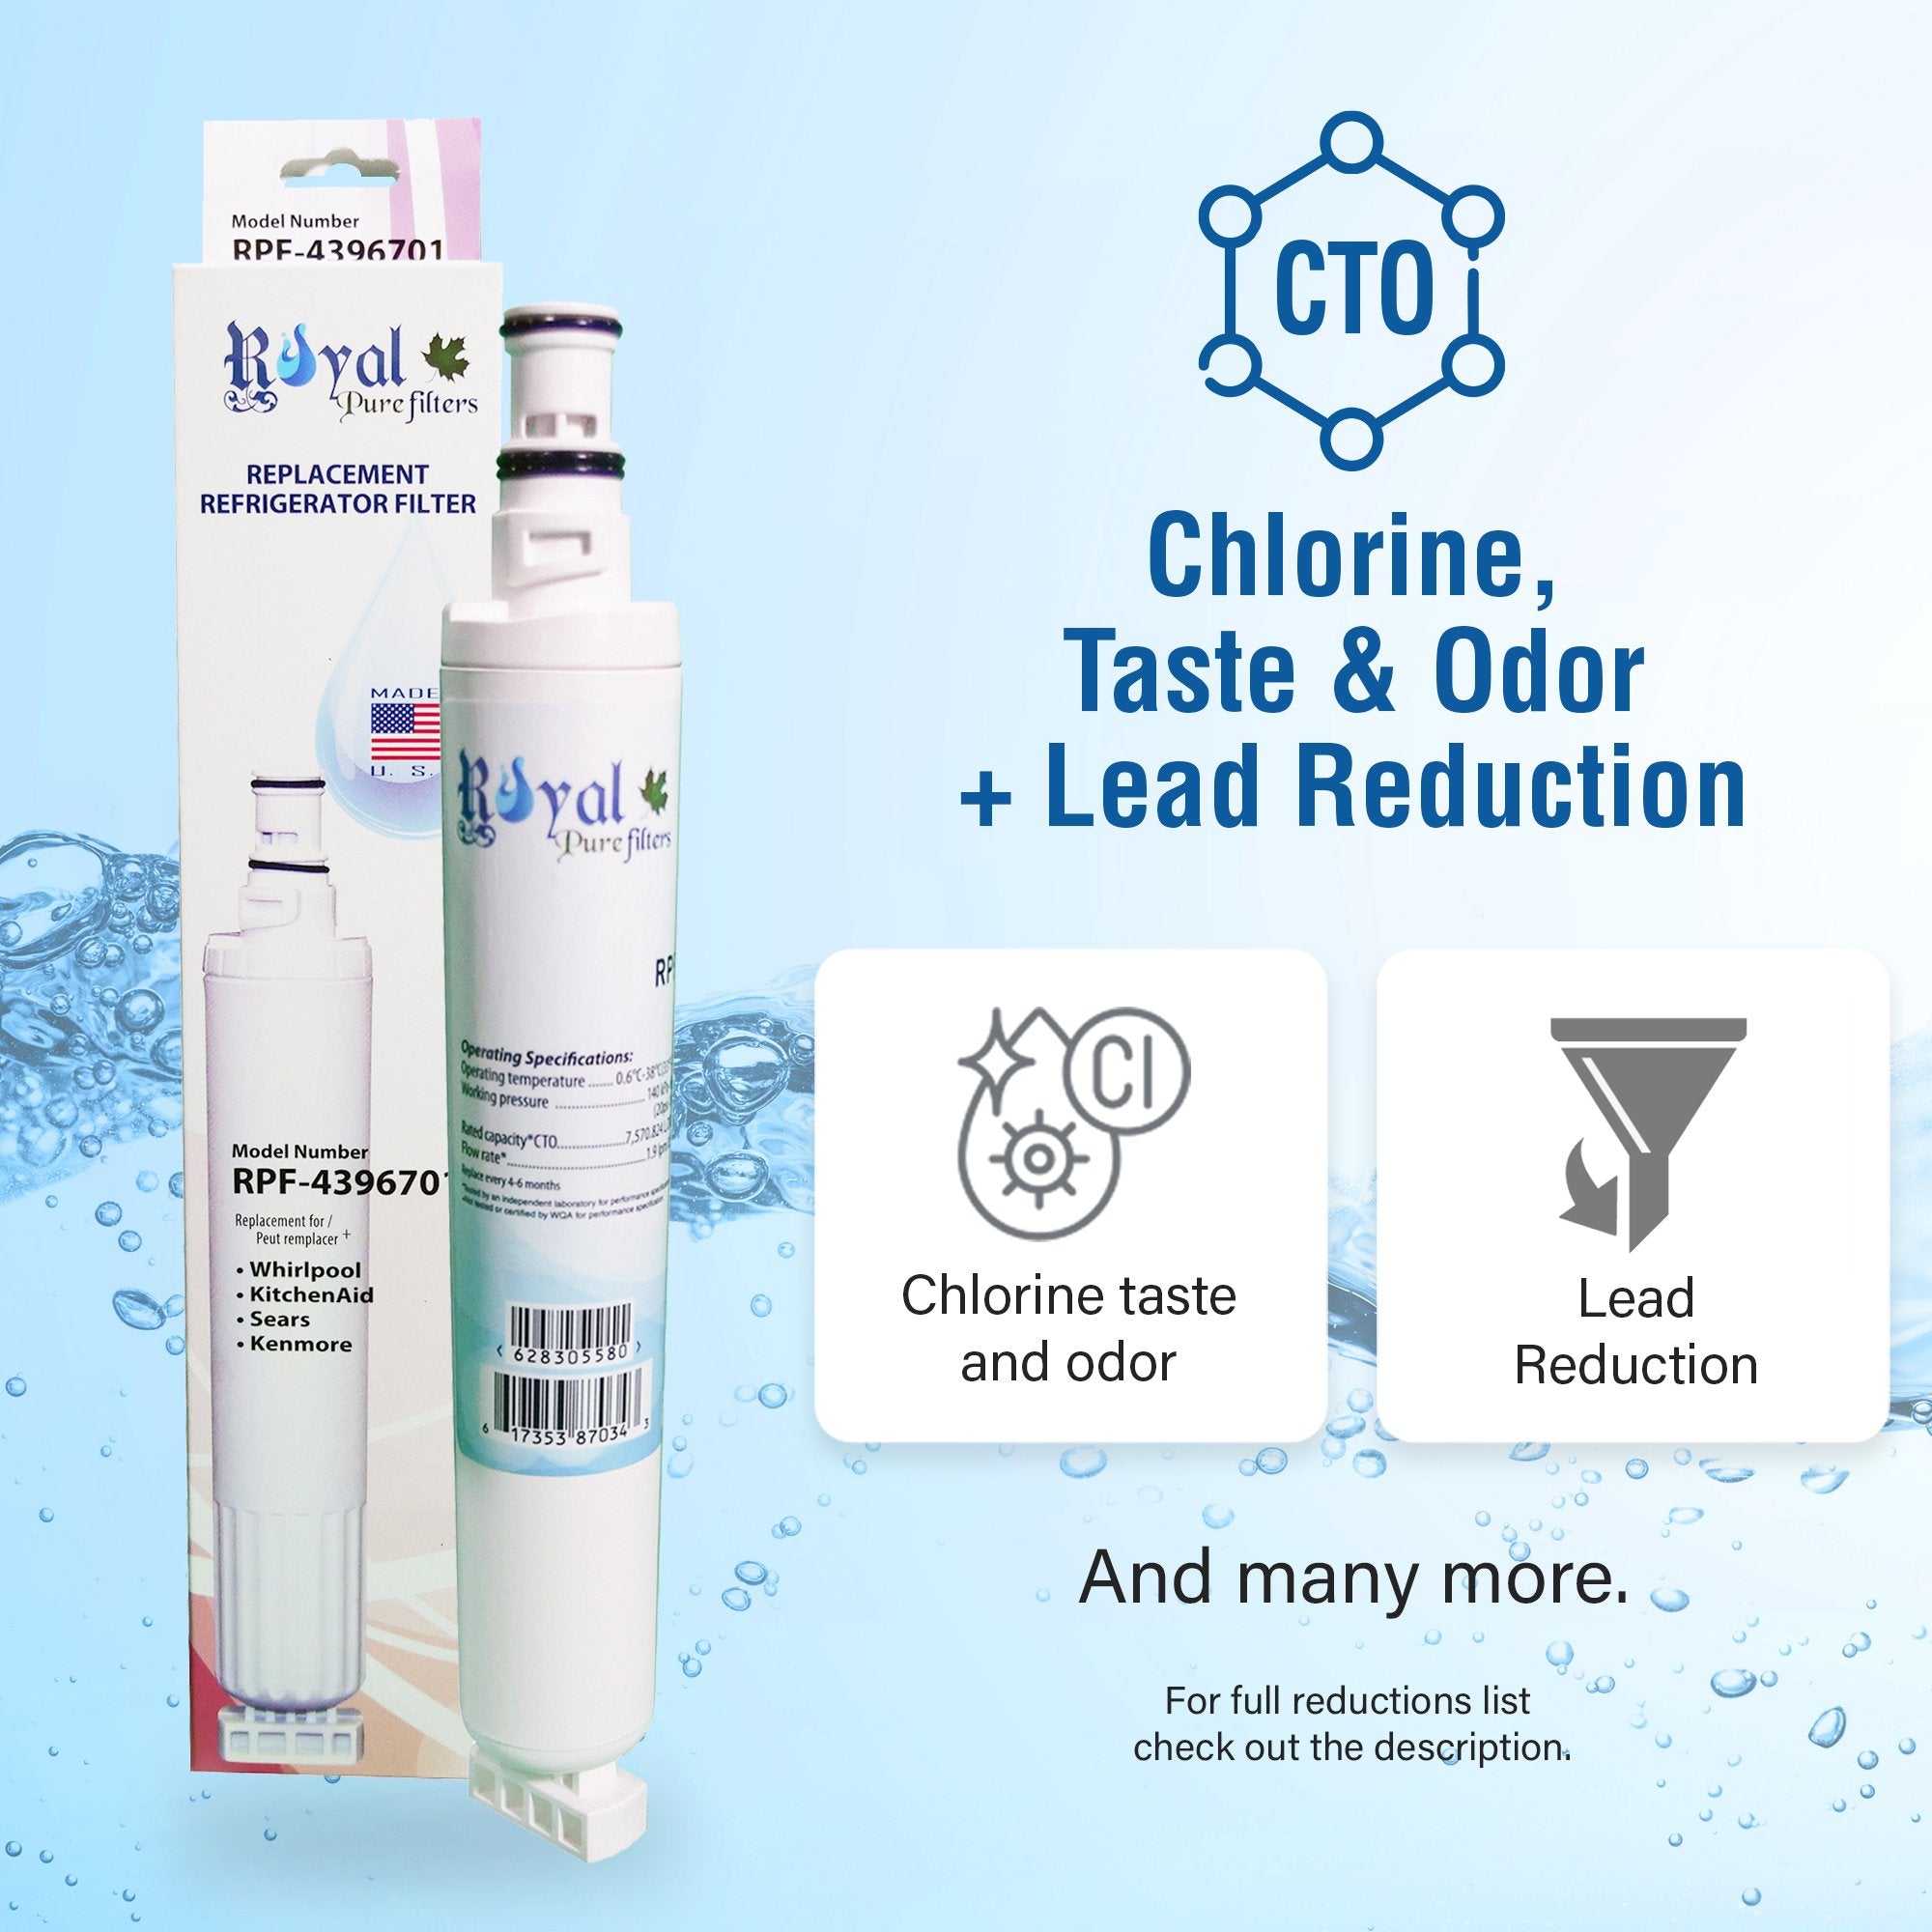 EveryDrop EDR6D1, Whirlpool 4396701/6701 & Kenmore 46-9915 Compatible CTO Refrigerator Water Filter